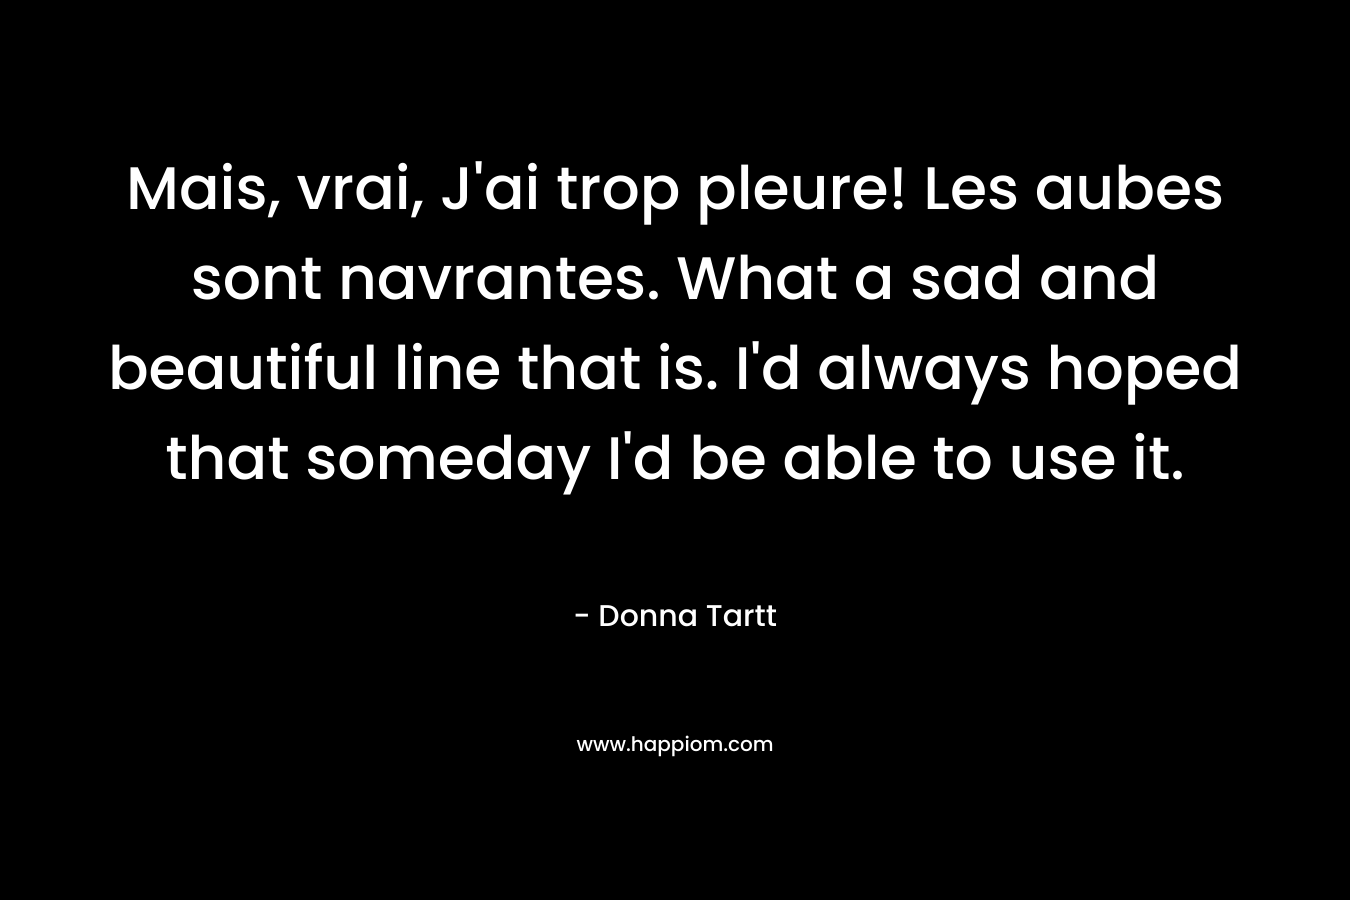 Mais, vrai, J’ai trop pleure! Les aubes sont navrantes. What a sad and beautiful line that is. I’d always hoped that someday I’d be able to use it. – Donna Tartt